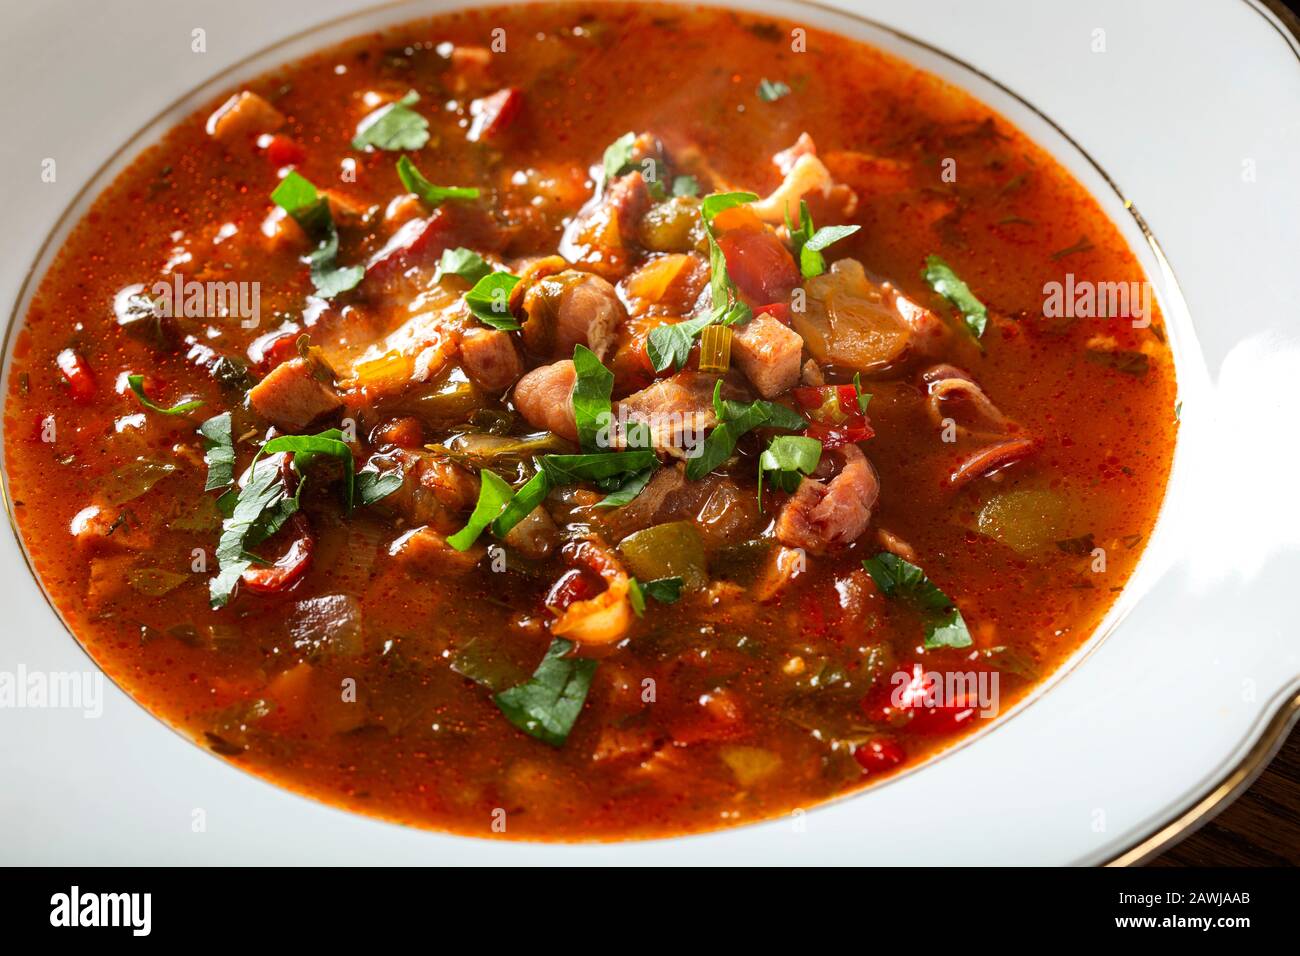 Goulash soup with meat and vegetables - traditional Hungarian food Stock Photo